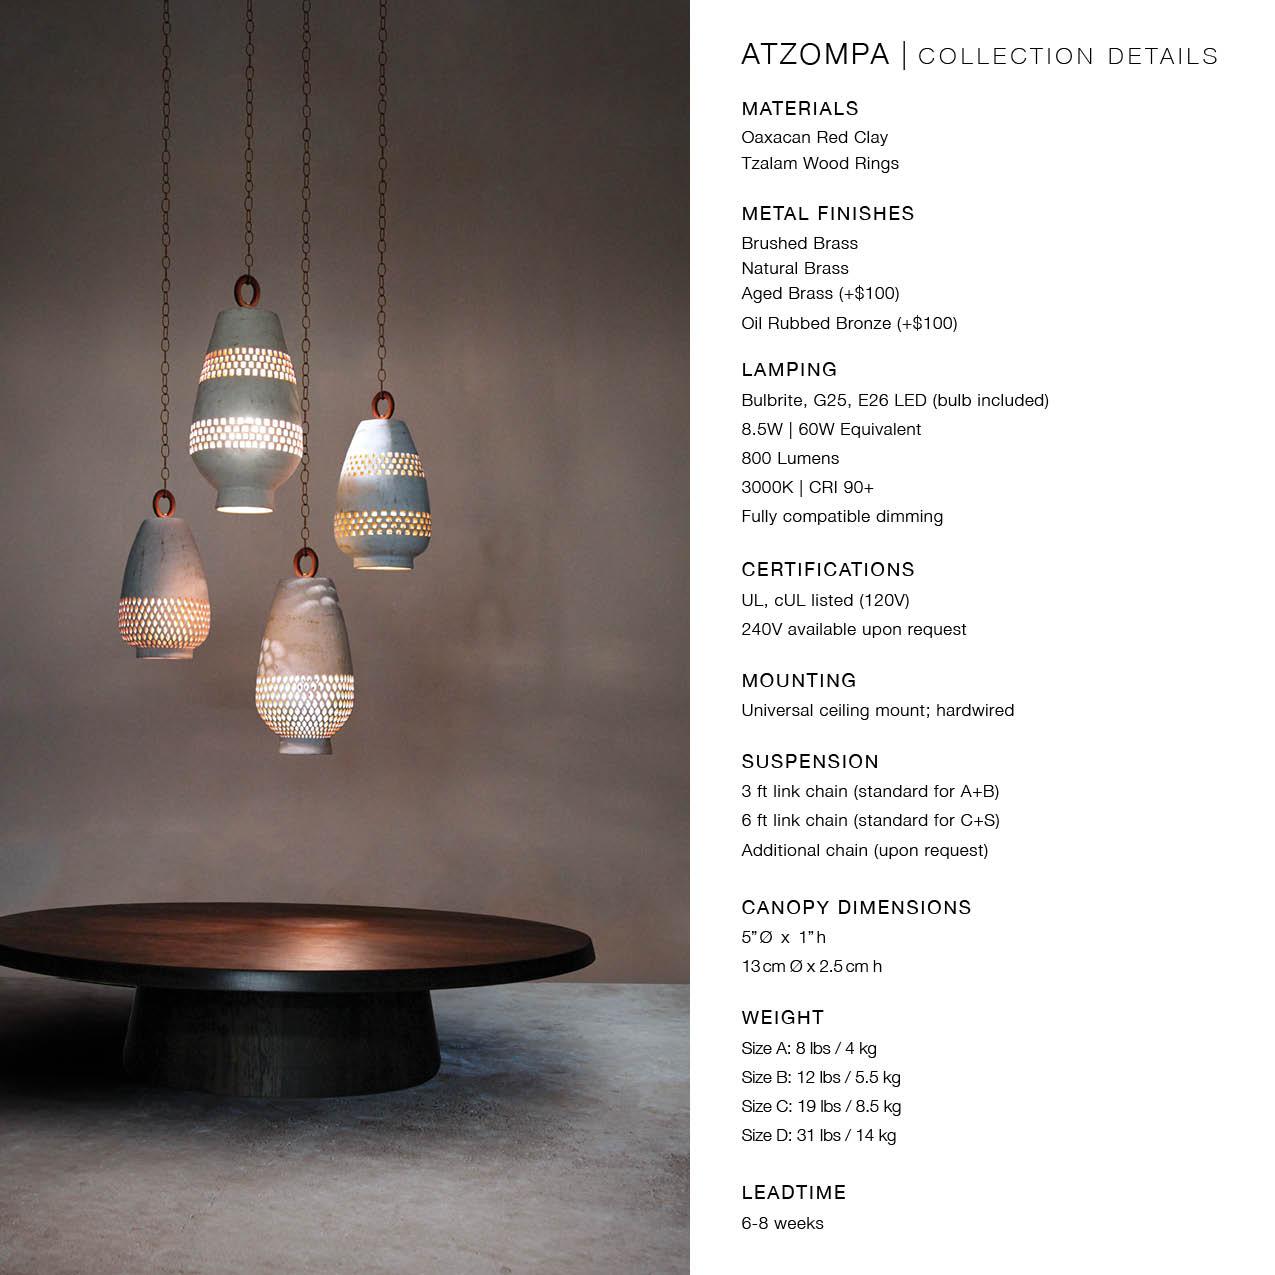 White Ceramic Pendant Light XL, Aged Brass, Diamantes Atzompa Collection In New Condition For Sale In New York, NY